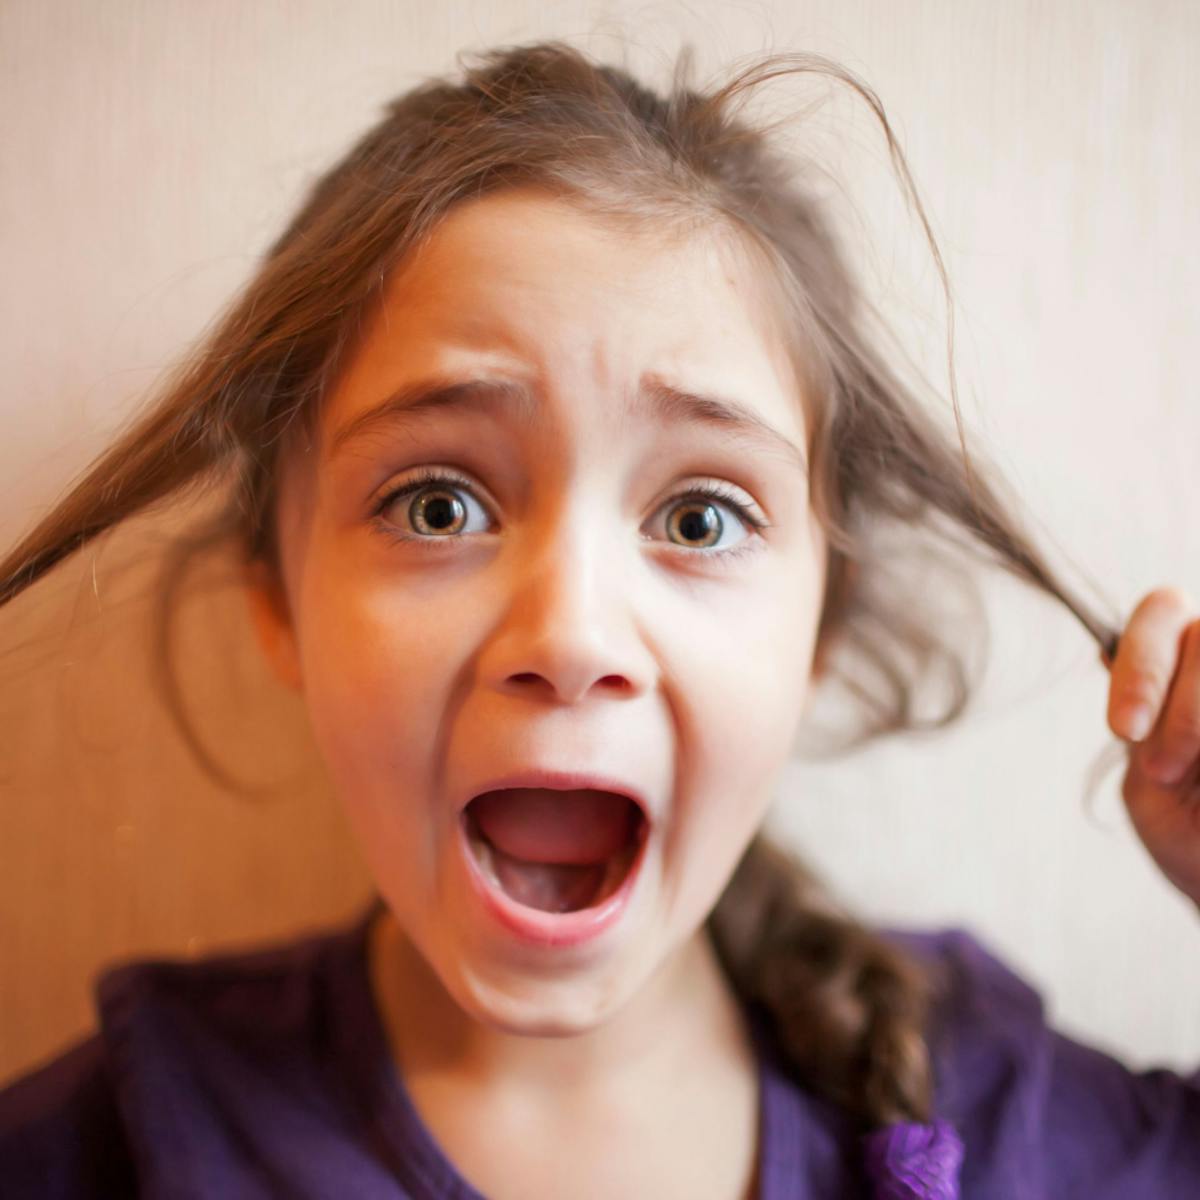 Hair-pulling In Kids: Why It Happens And How To Stop It - Netmums